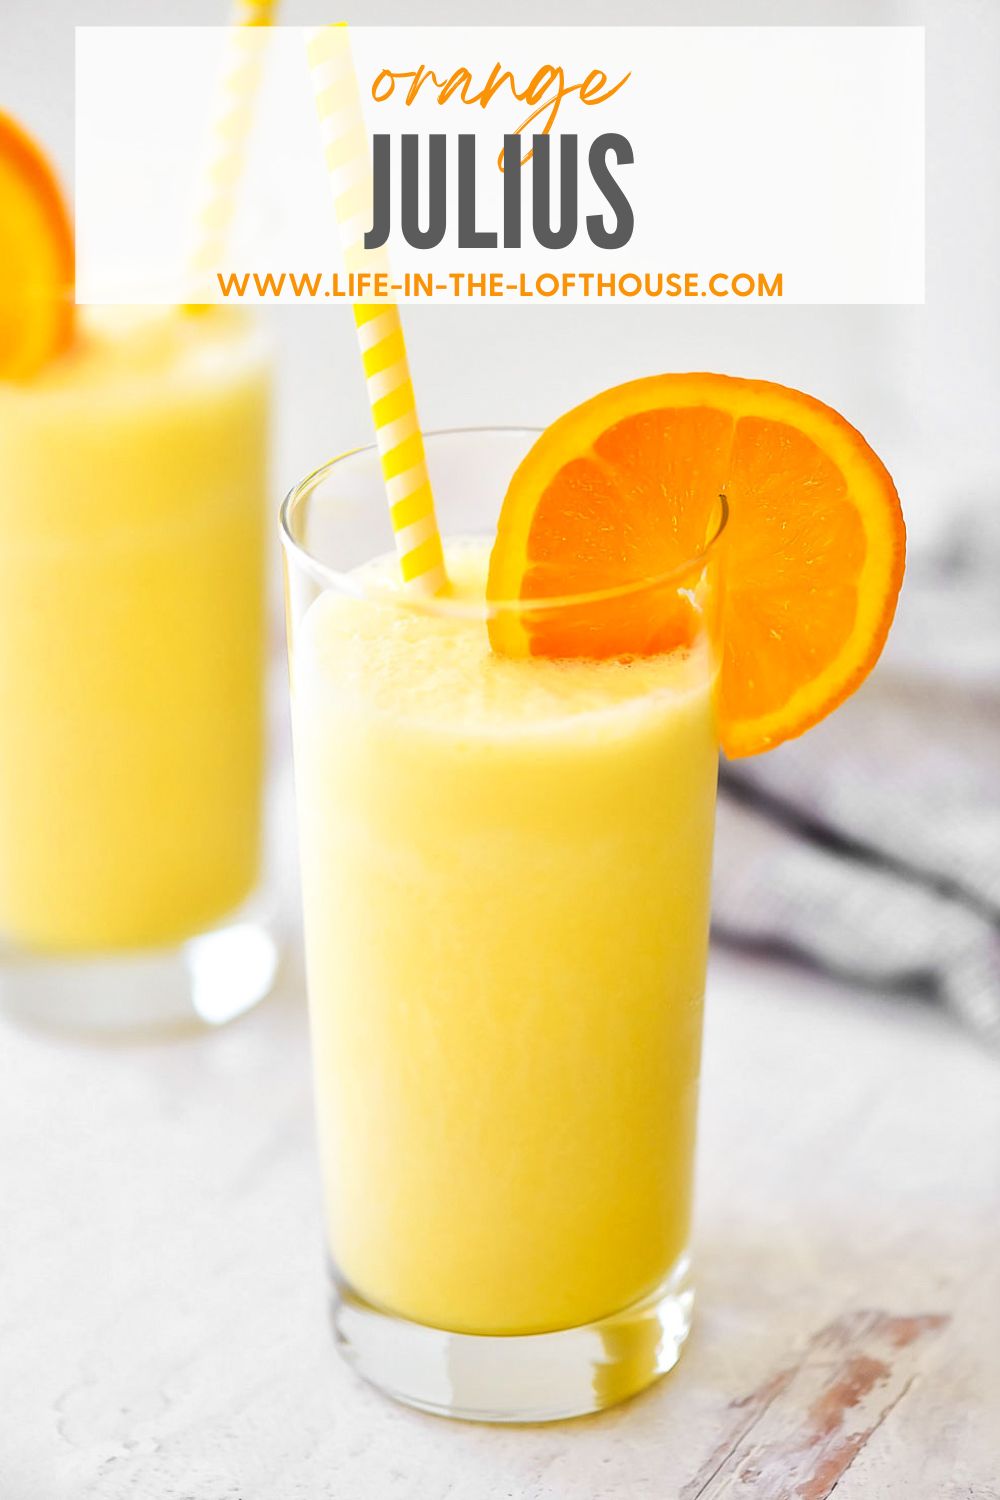 Orange Julius is a delicious frozen drink that tastes like a creamsicle. Life-in-the-Lofthouse.com